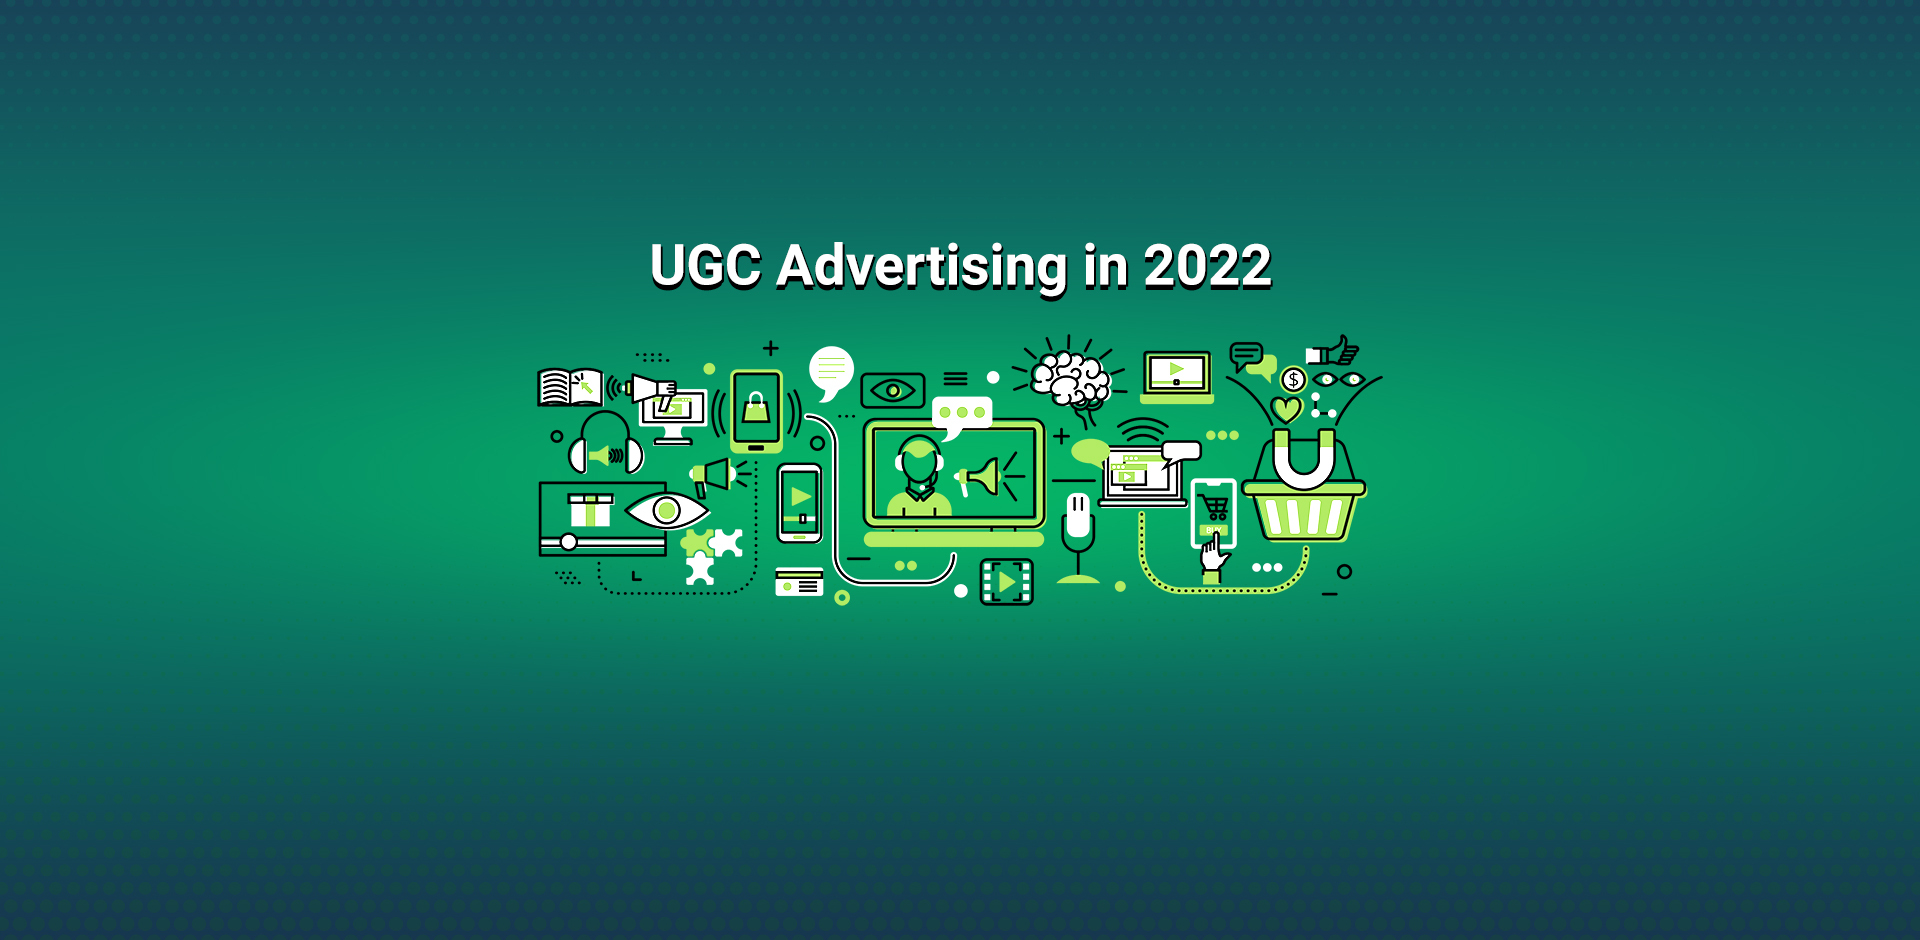 Influencer Marketing and UGC Advertising in 2022 Infographic